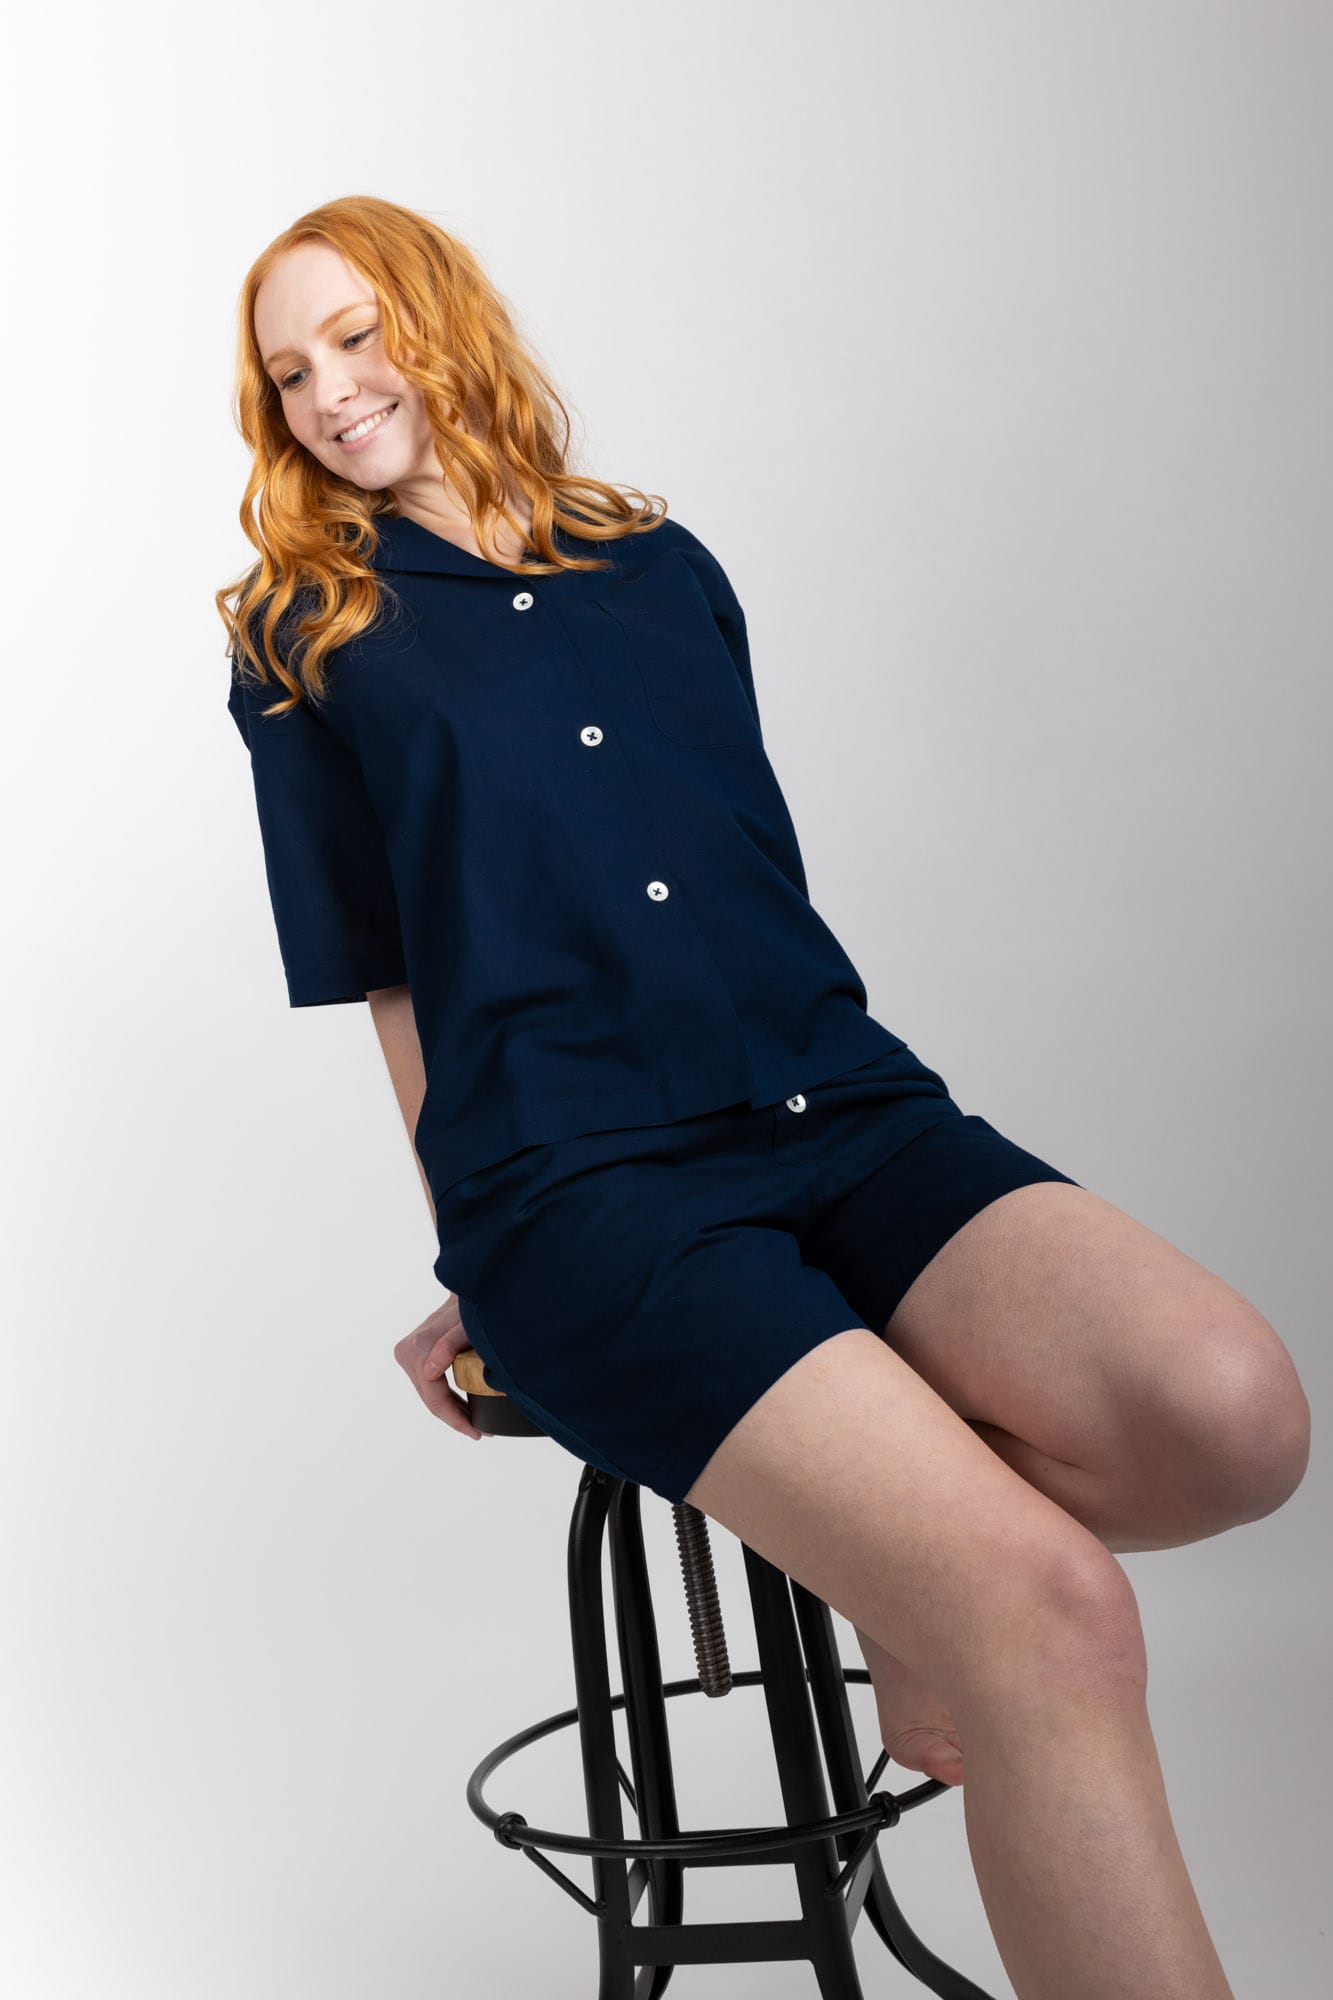 Women’s pyjama set including a short sleeve shirt and shorts. Made from an organic cotton and linen blend, in Navy.  The shirt has shell buttons, a front pocket and a back pleat with locker loop detail.  The shorts feature natural shell buttons and an elasticated waistband for comfort.